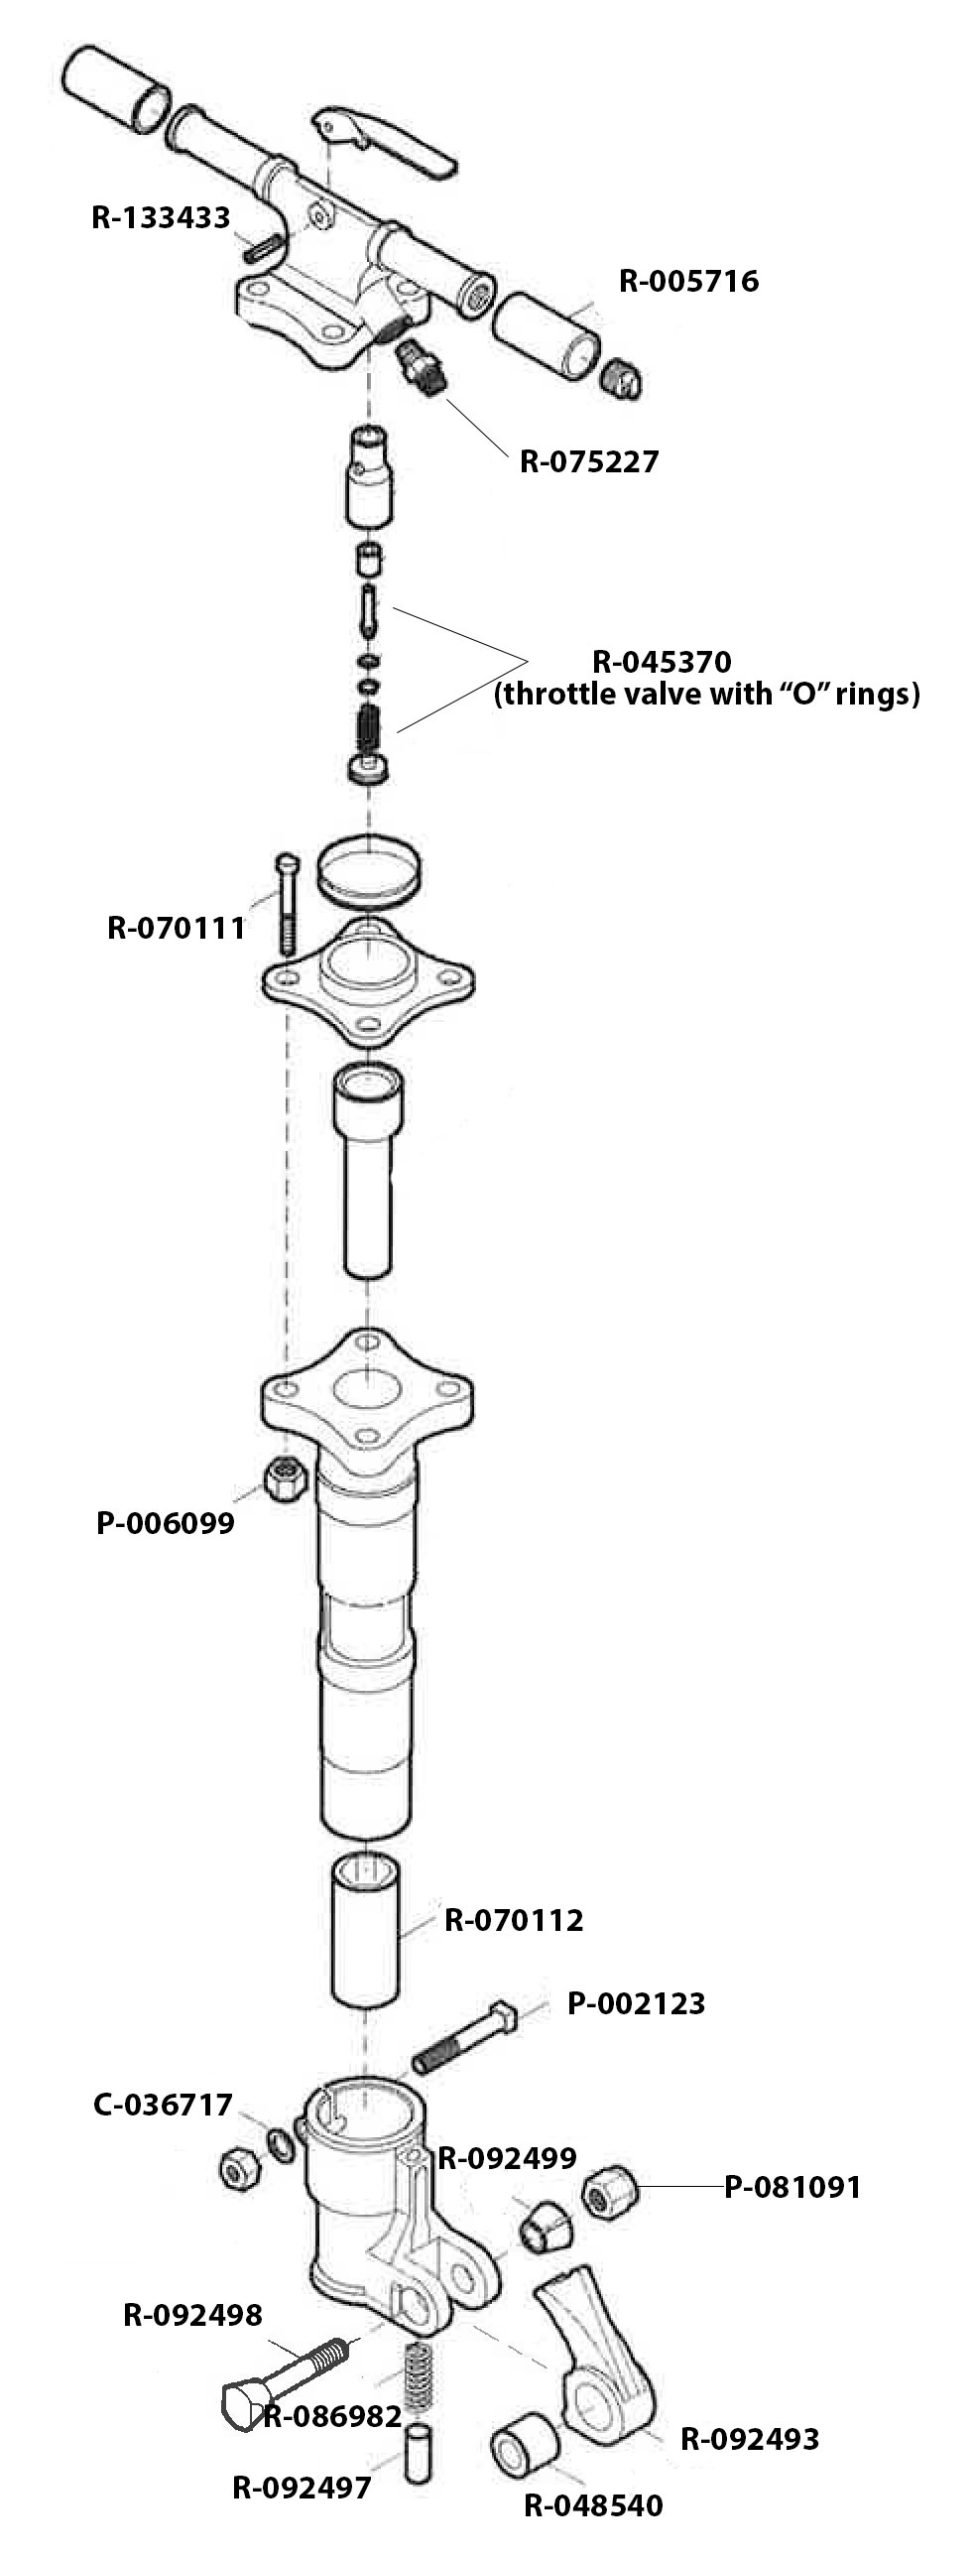 CP 0112 & CP 0112S Schematic & Replacement Parts for Chicago Pneumatic - CP 0112 & CP 0112S - Paving Breaker